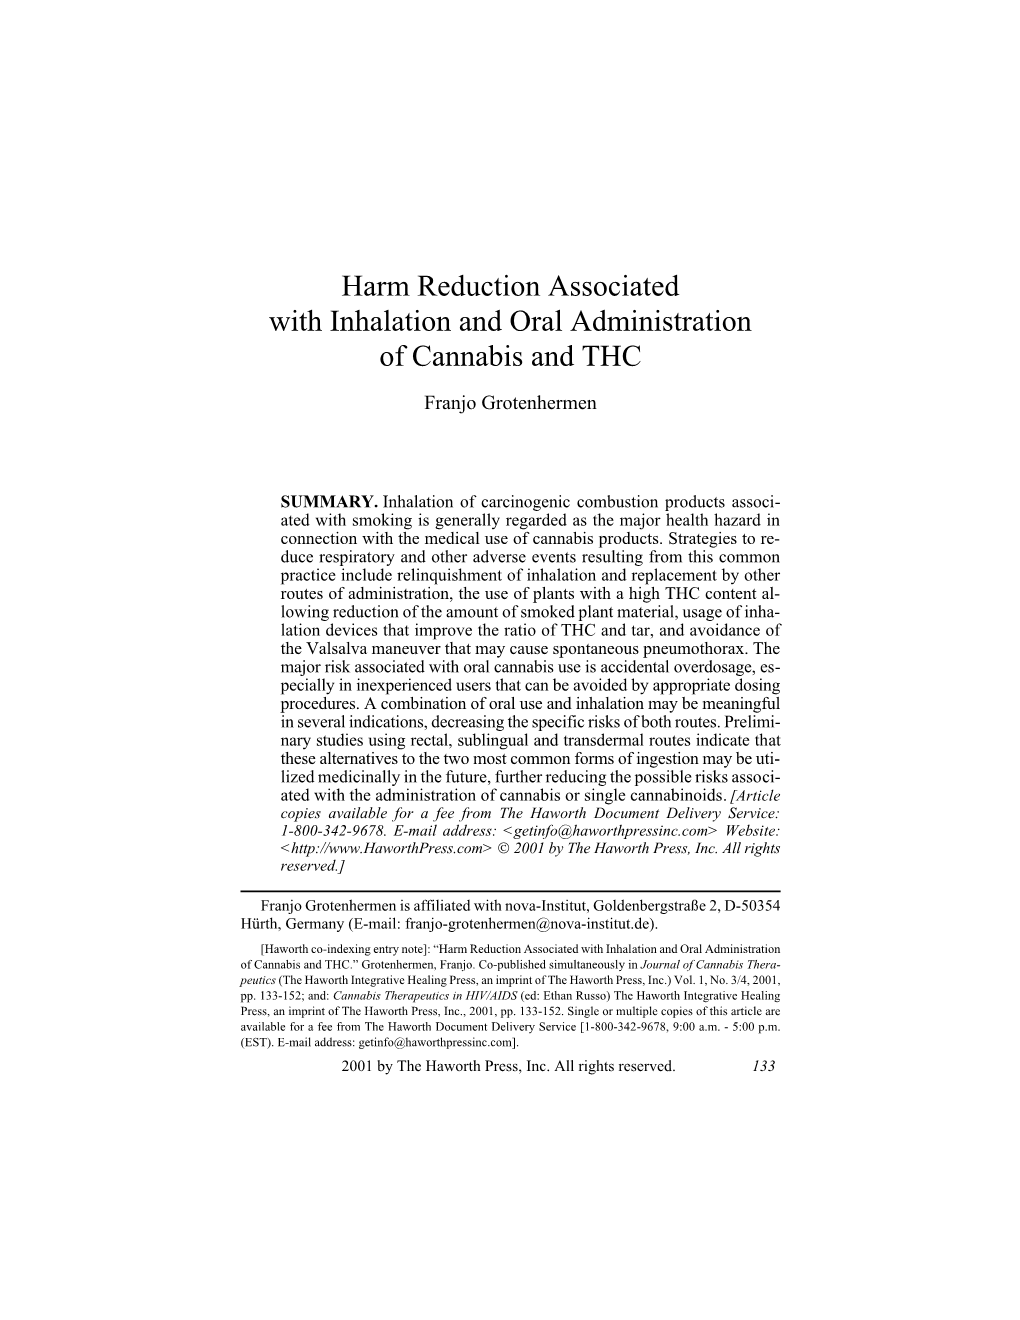 Harm Reduction Associated with Inhalation and Oral Administration of Cannabis And